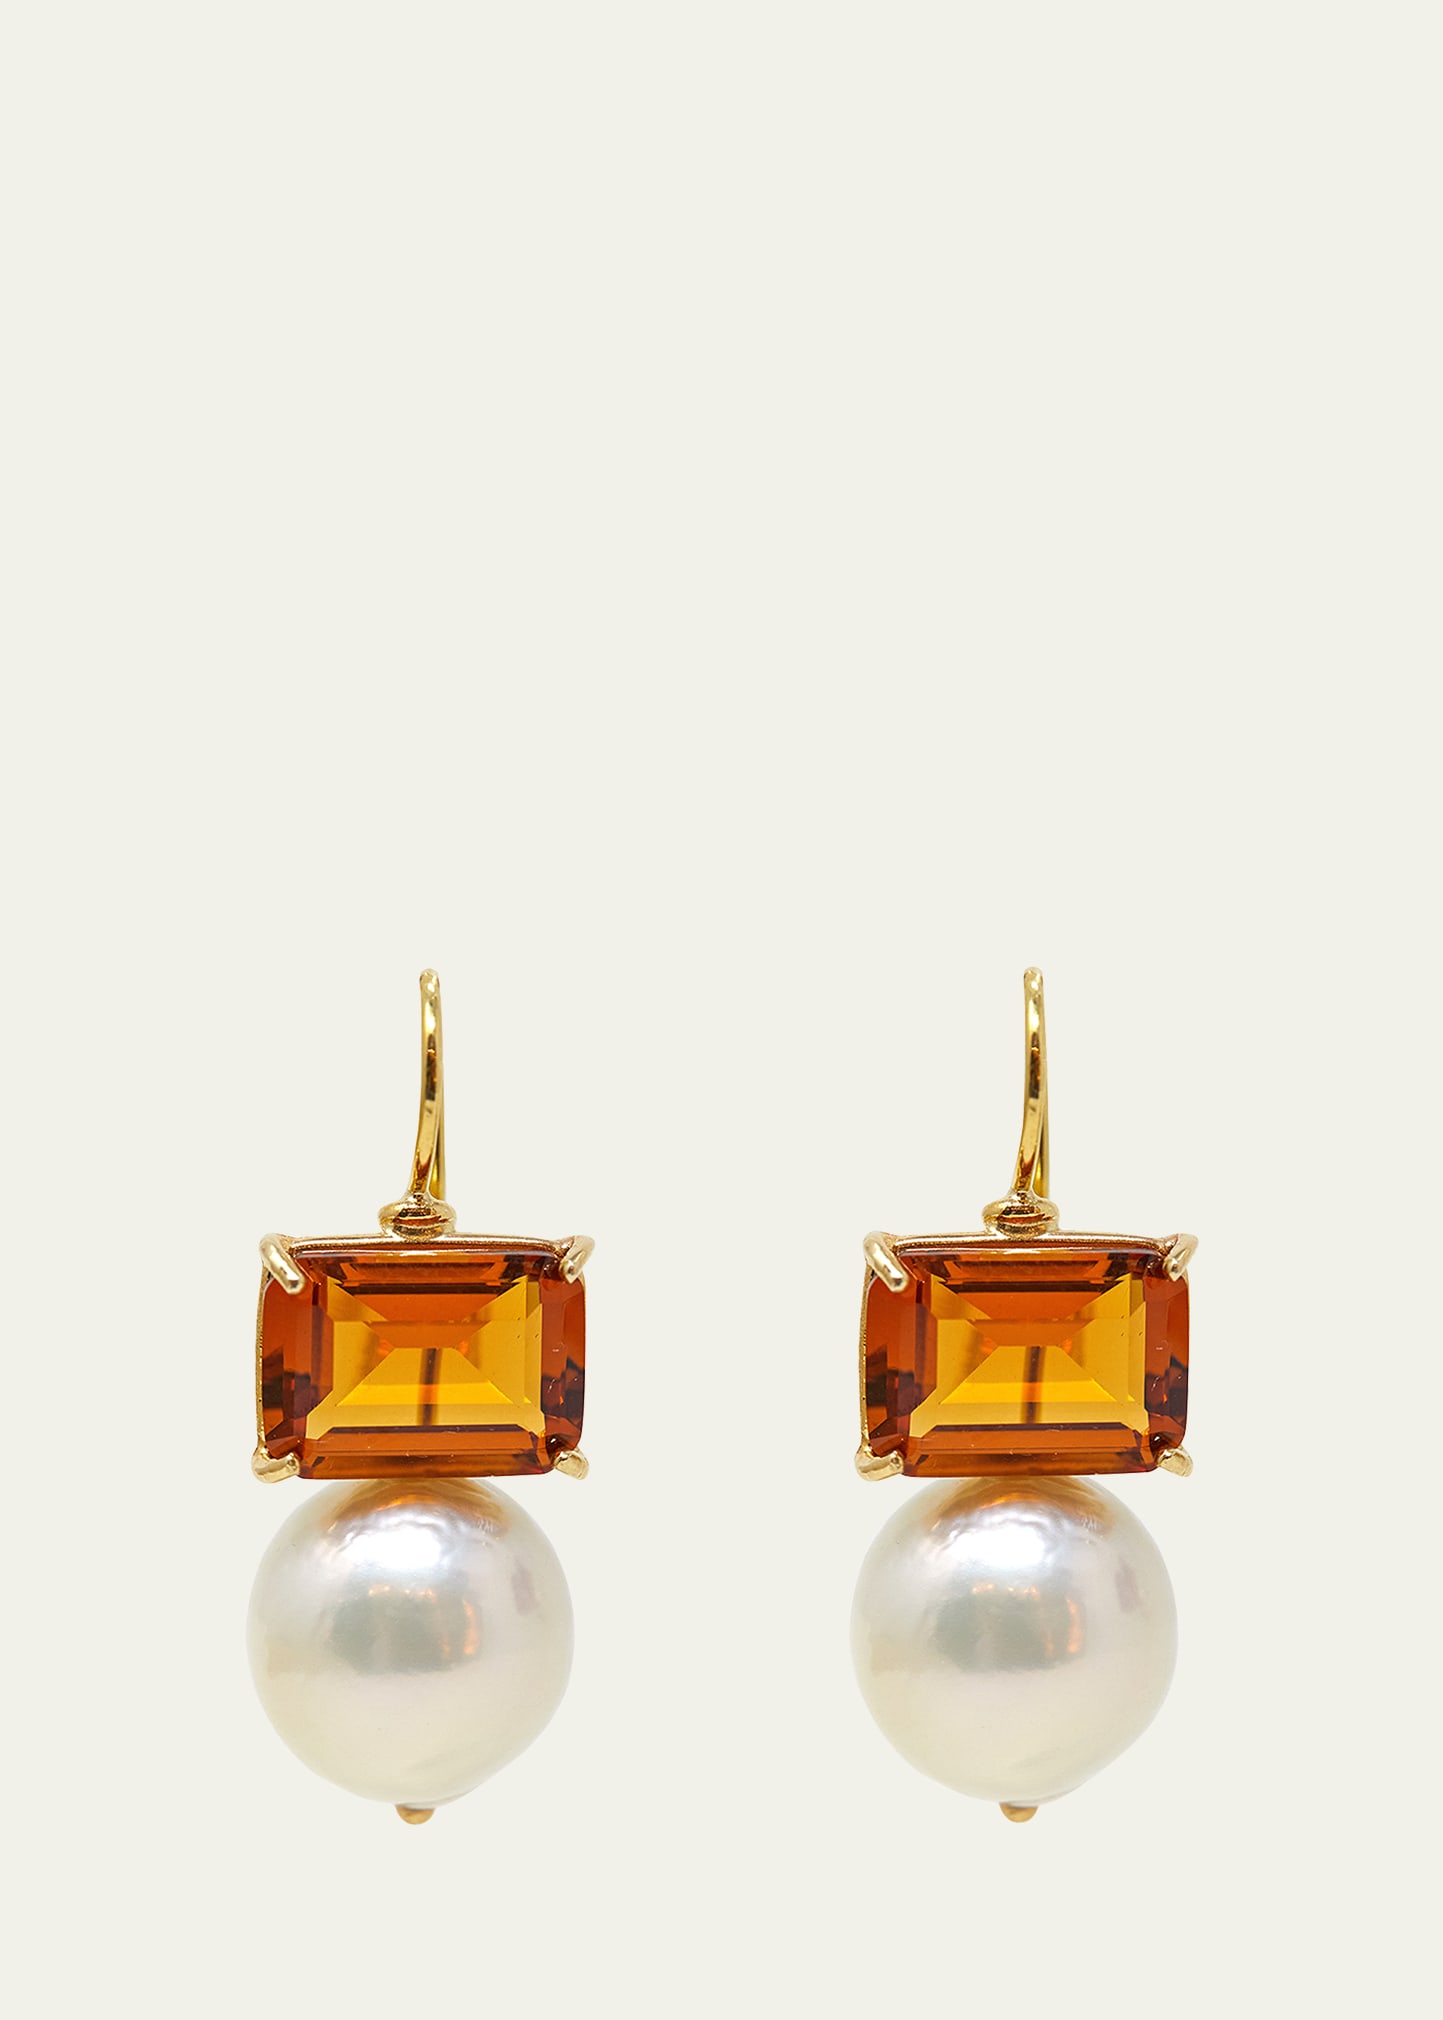 18K Yellow Gold Monachina Stone Hook Earrings with Freshwater Pearls and Citrine Quartz